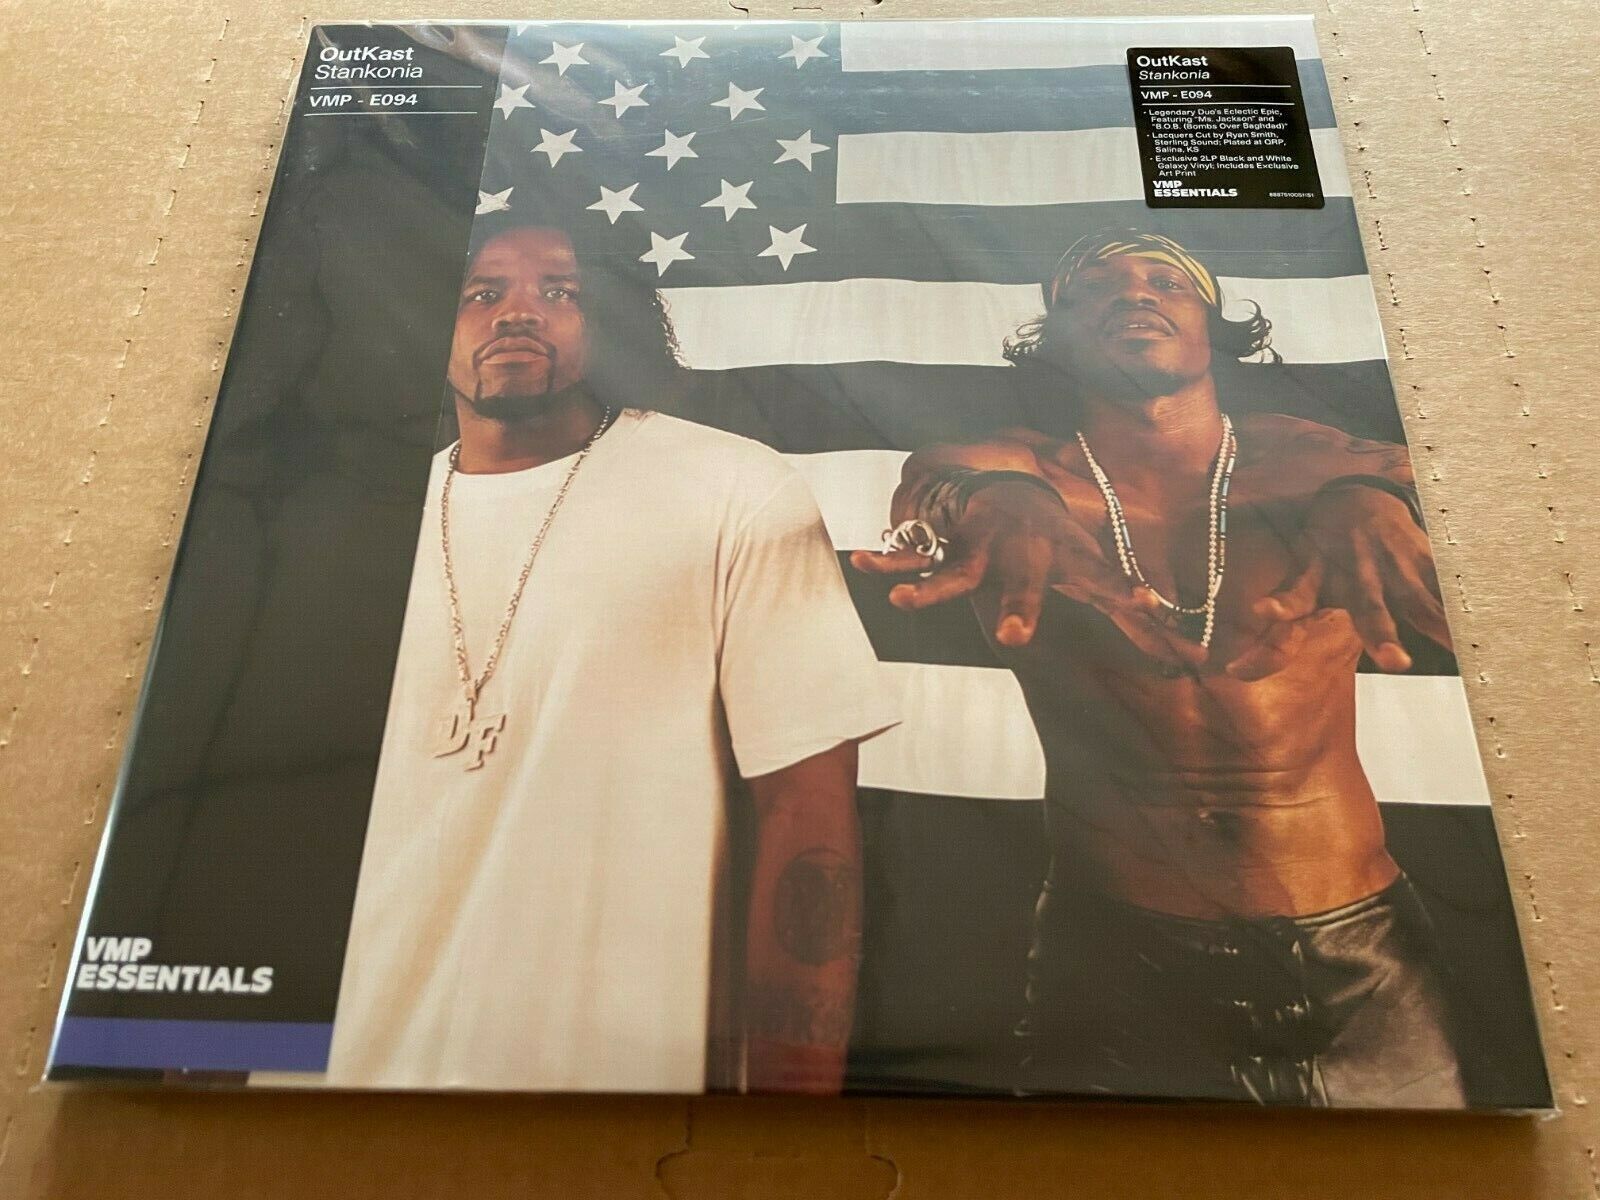 NEW SEALED Outkast - Stankonia COLORED Vinyl 2xLP VMP